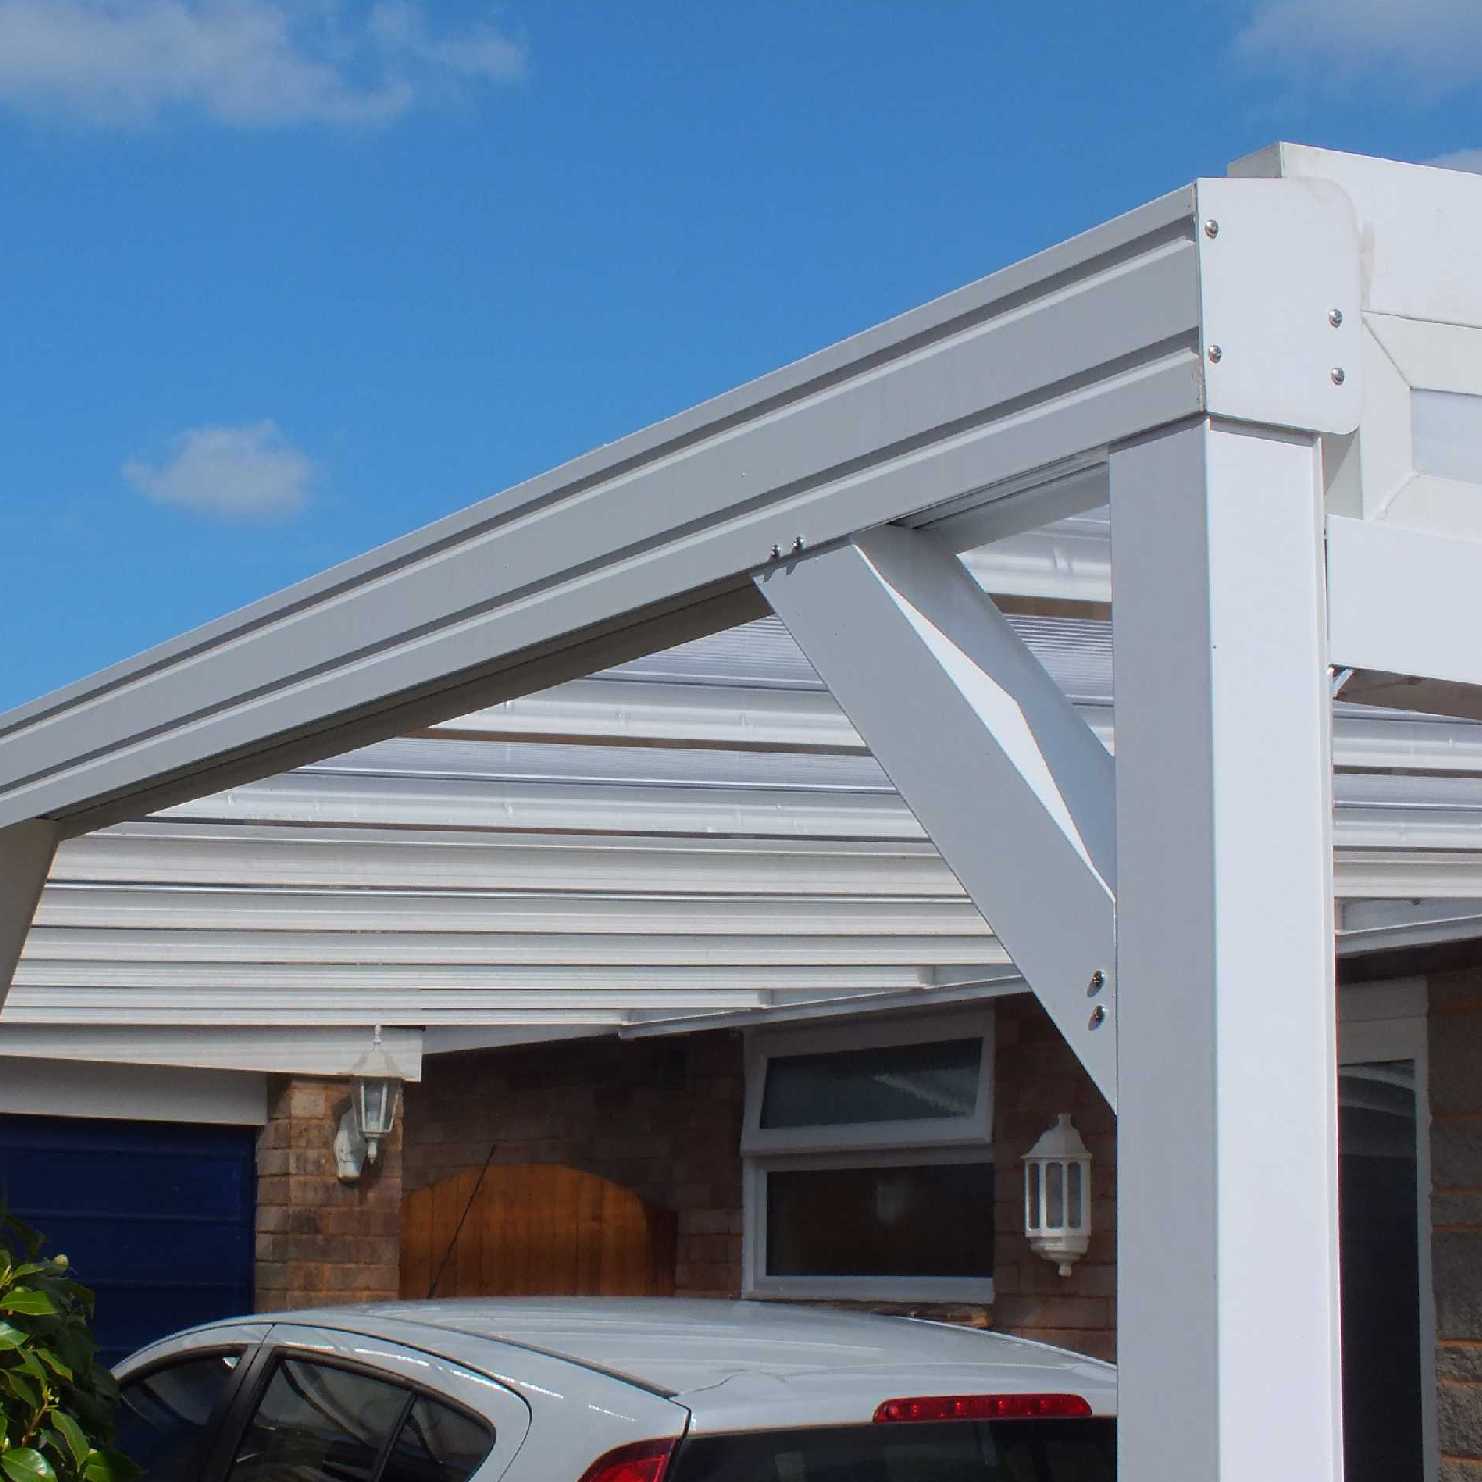 Great deals on Omega Smart Lean-To Canopy, White with 16mm Polycarbonate Glazing - 6.0m (W) x 2.5m (P), (3) Supporting Posts